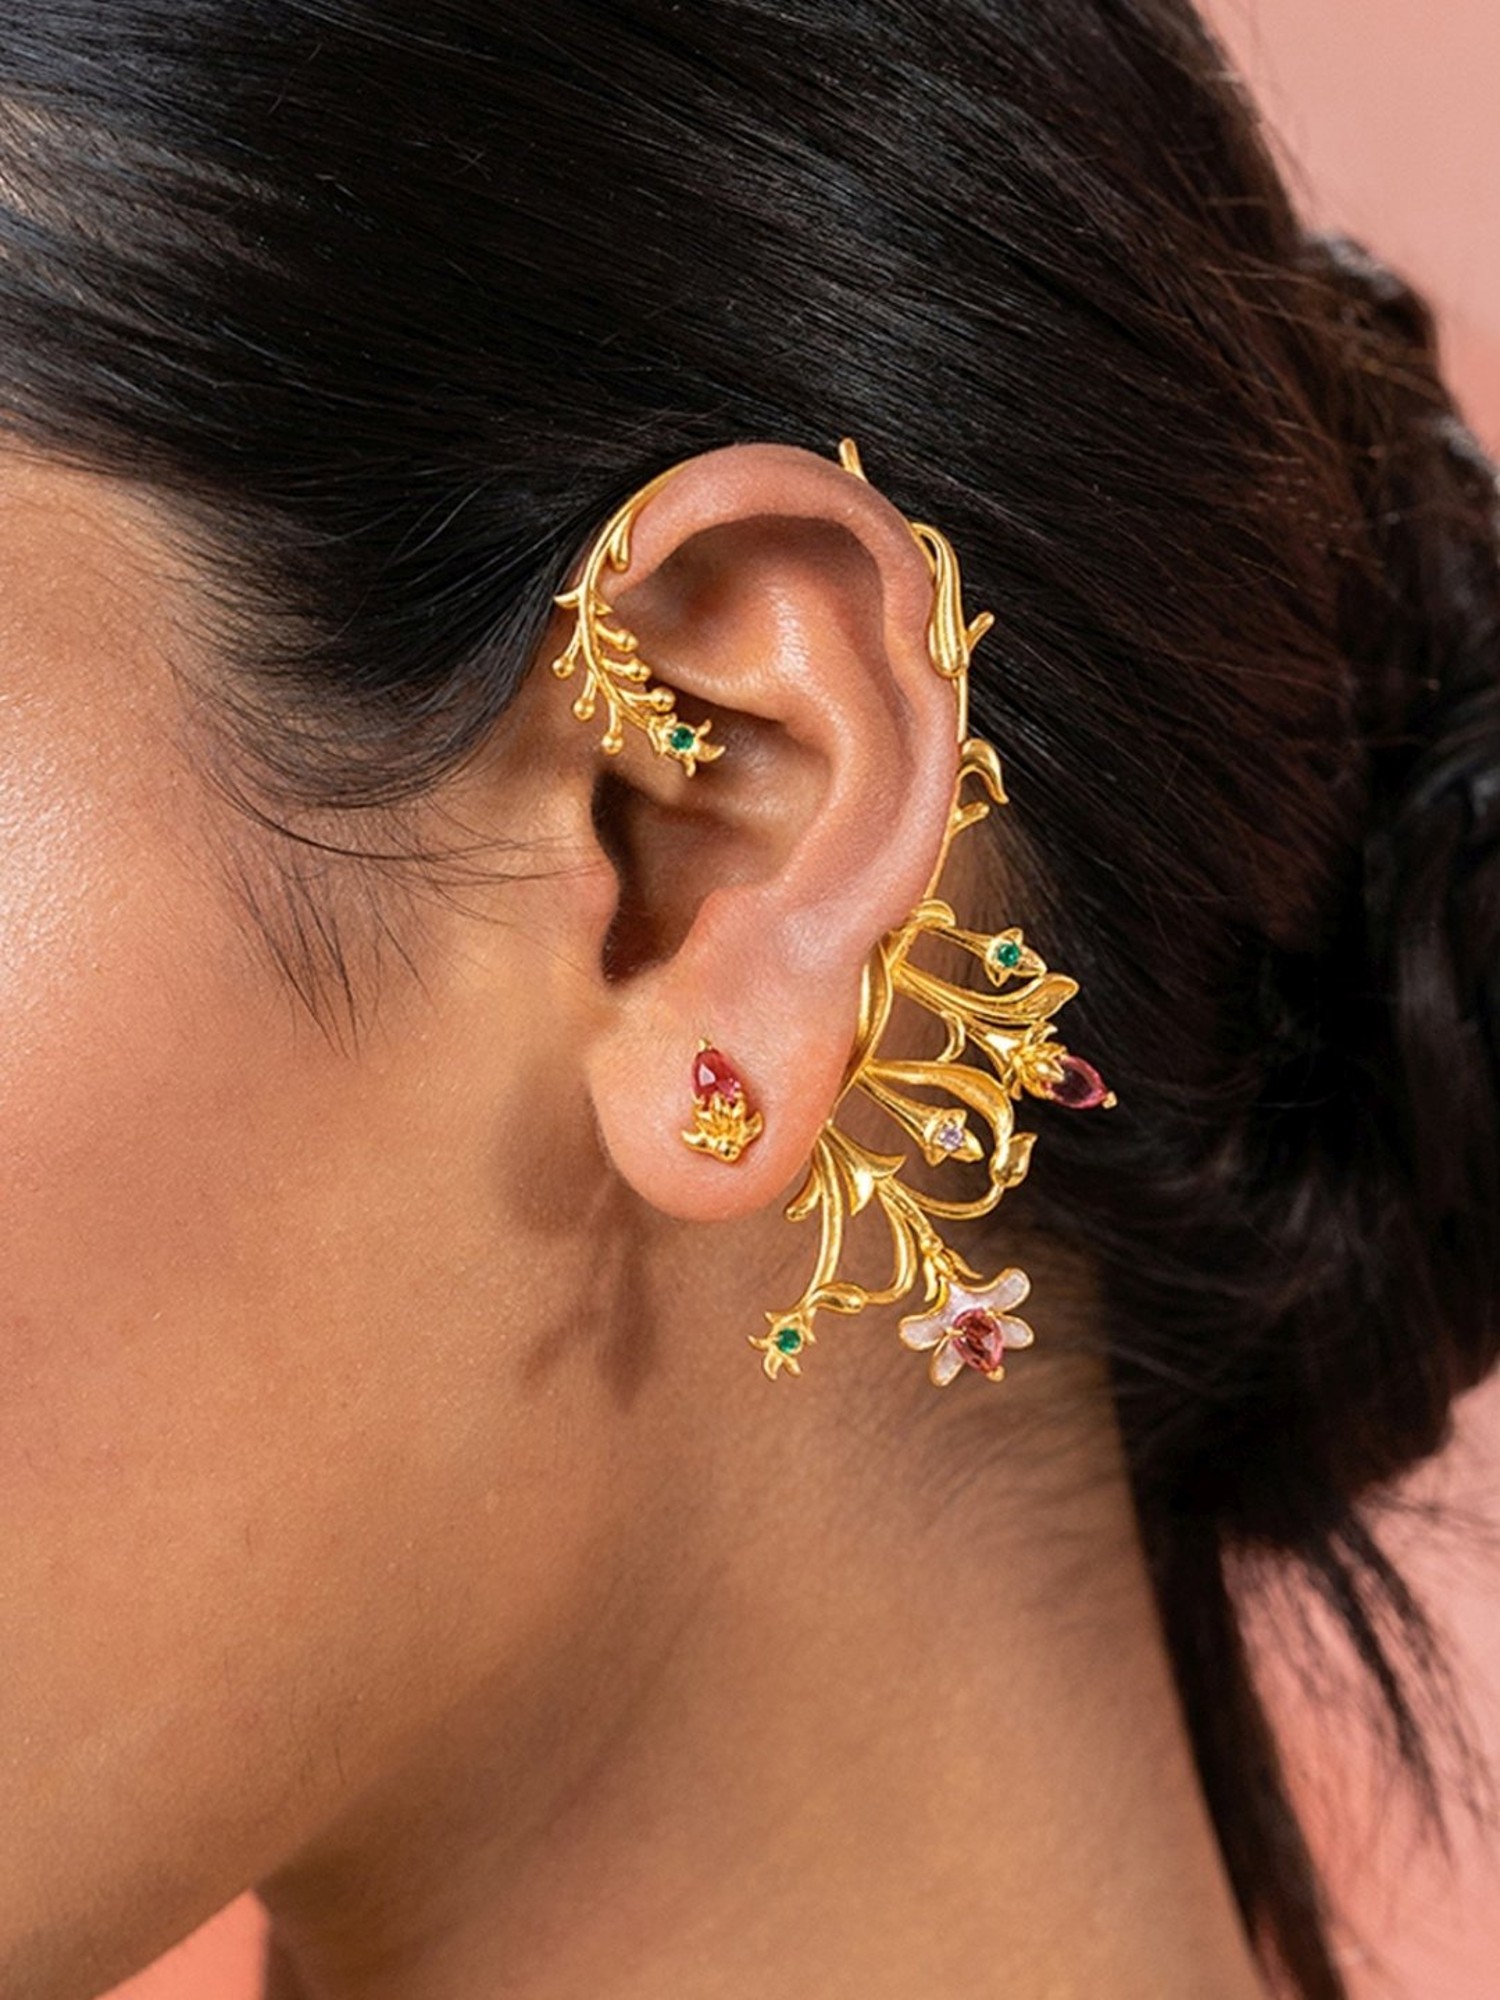 Buy Full Ear Cuff Online In India - Etsy India-sgquangbinhtourist.com.vn